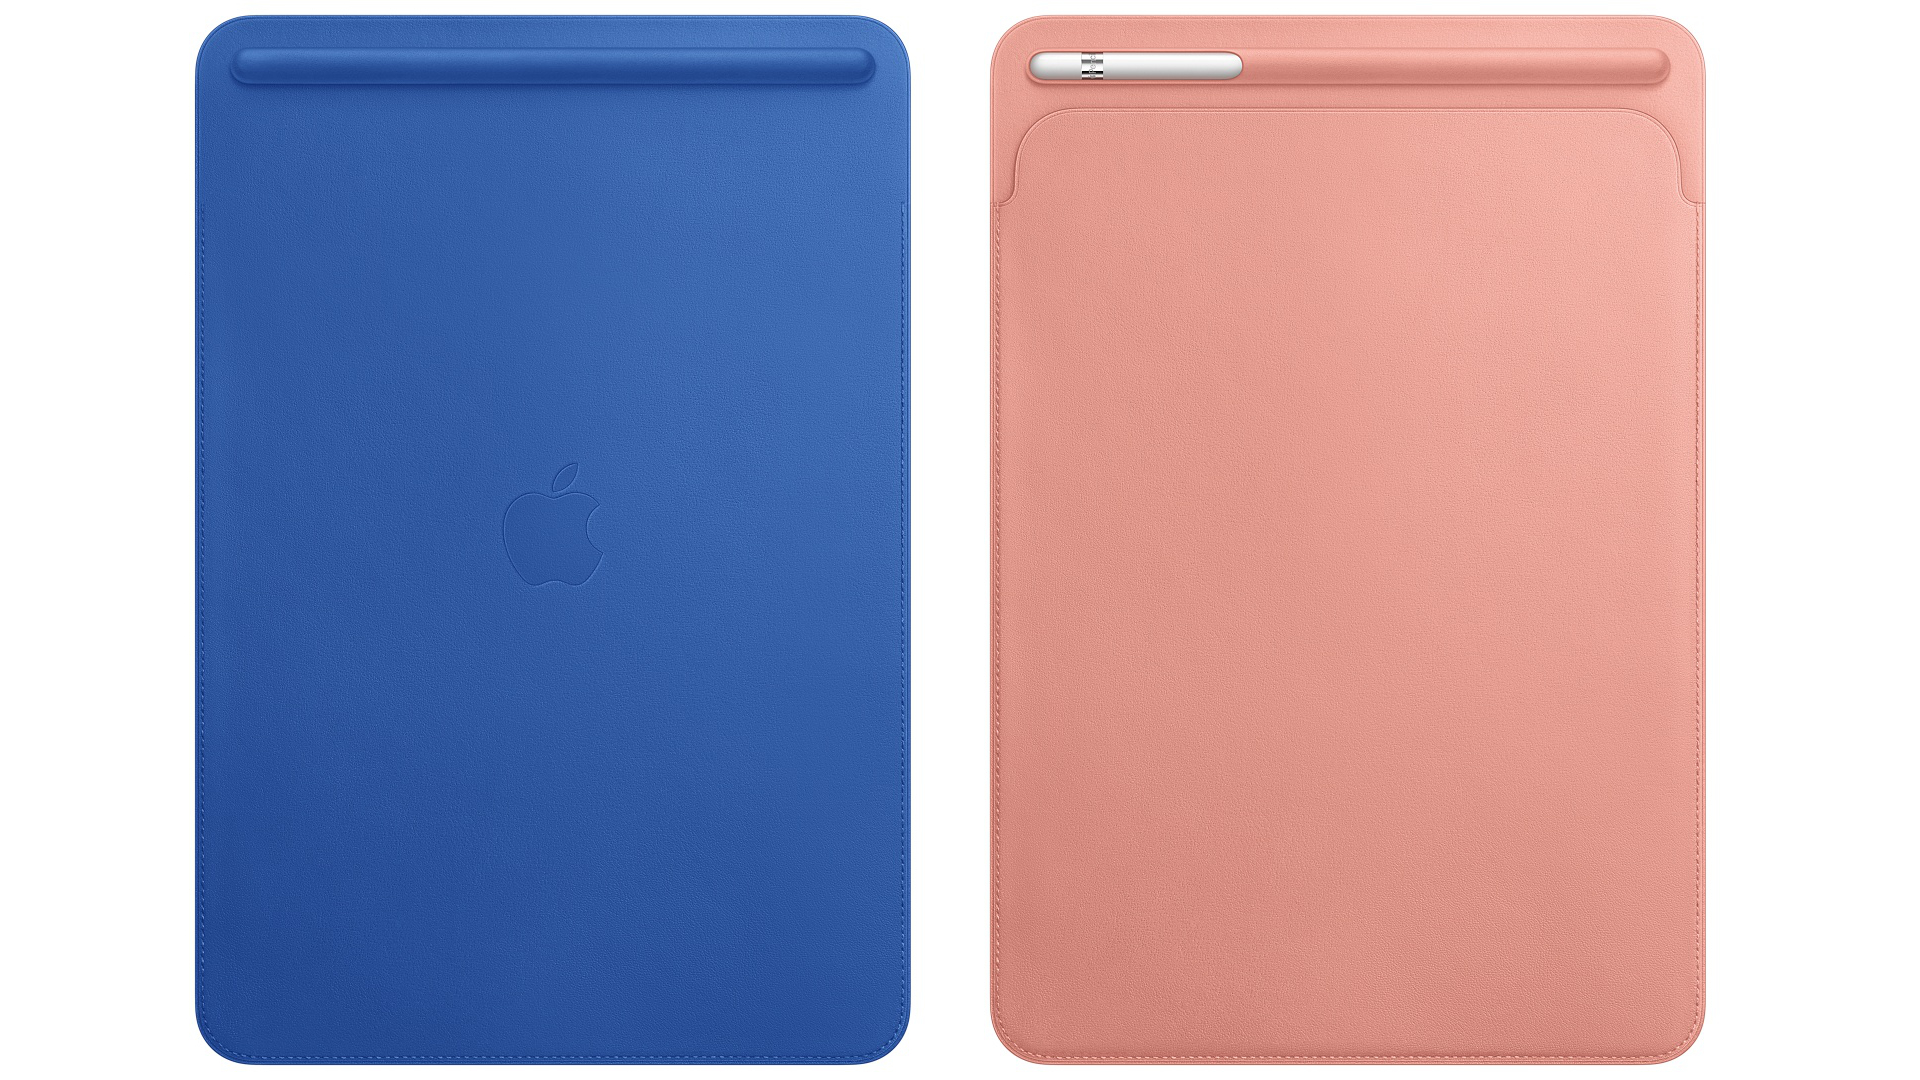 Apple launches new spring-inspired Leather Sleeve and Smart Cover colors  for 10.5-inch iPad Pro - 9to5Mac